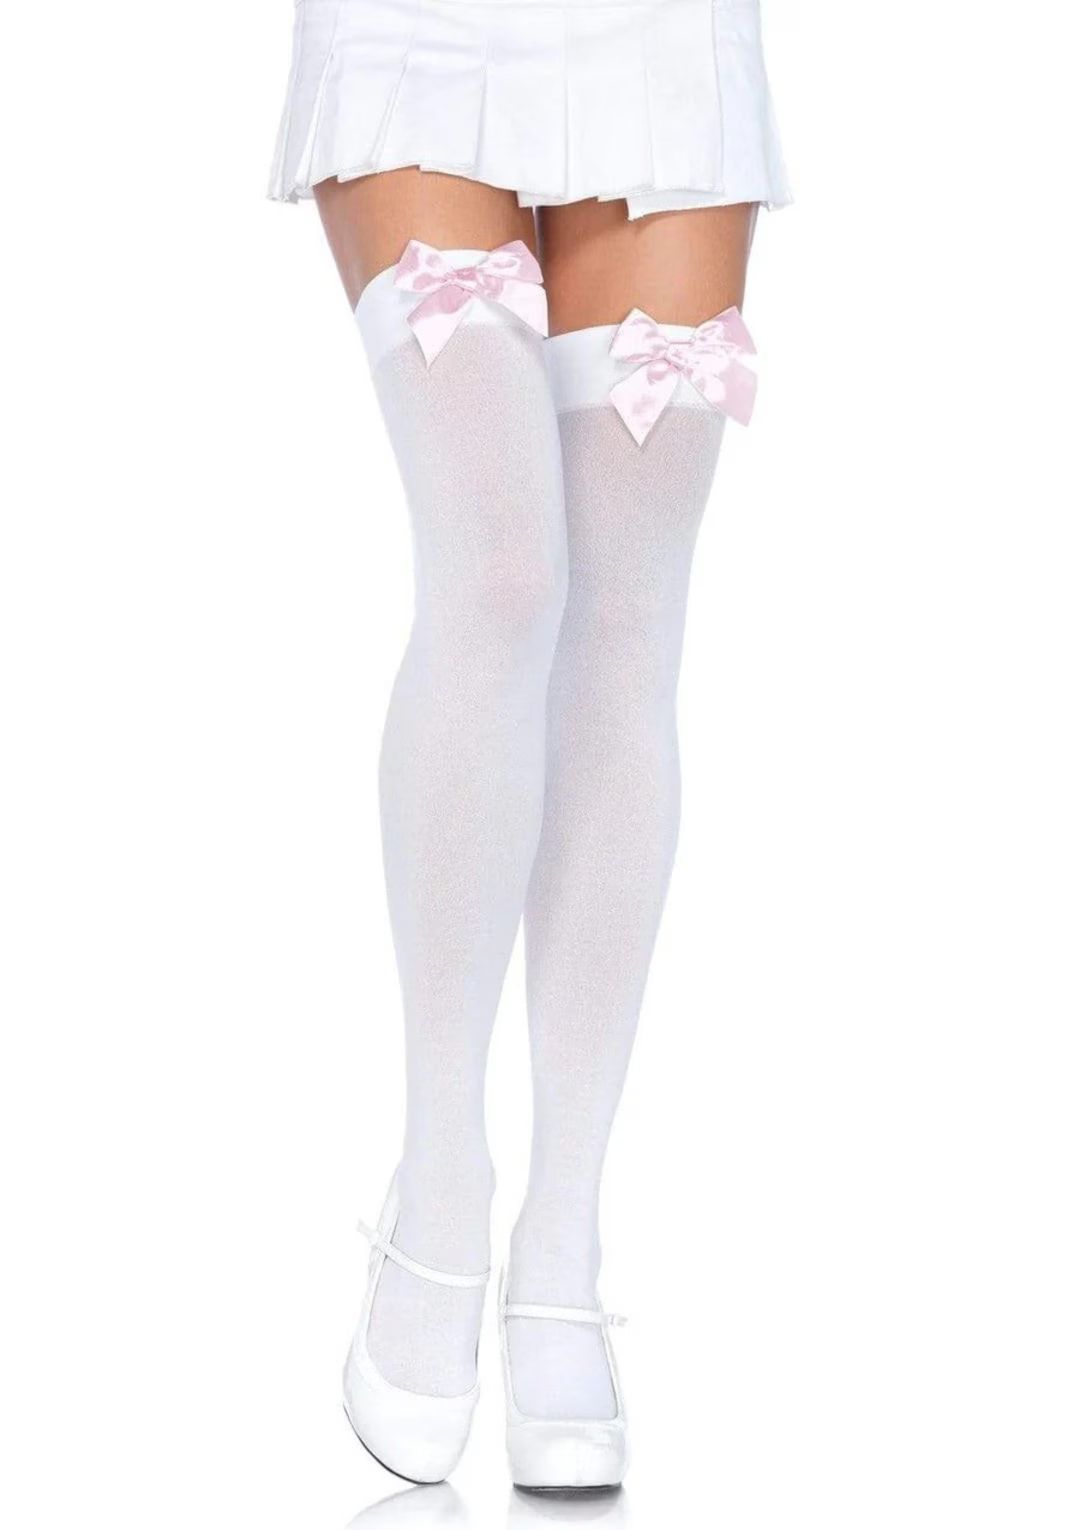 BOW THIGH HIGH Stockings Opaque White With Pink Satin Bows - Etsy | Etsy (US)